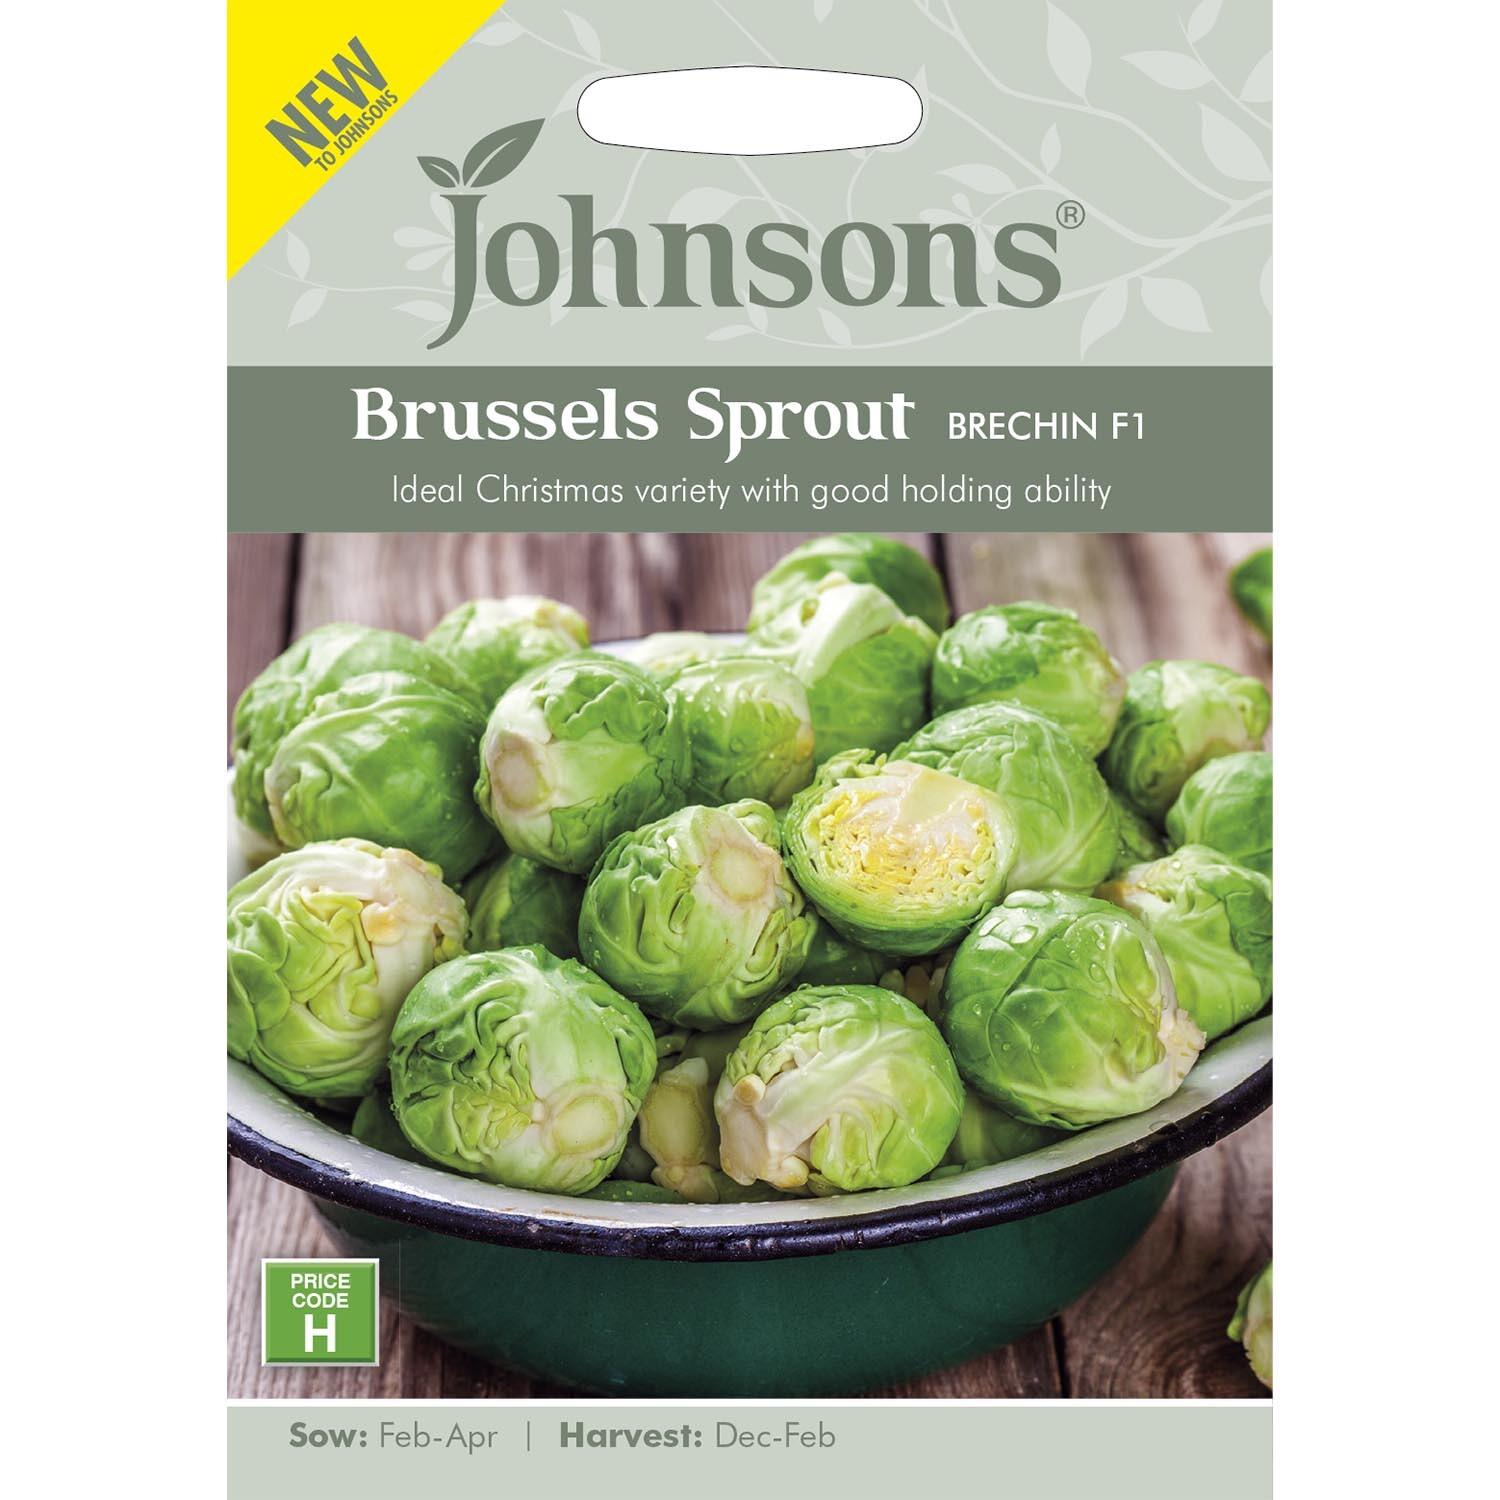 Johnsons Brussels Sprout Brechin F1 Vegetable Seeds Image 2